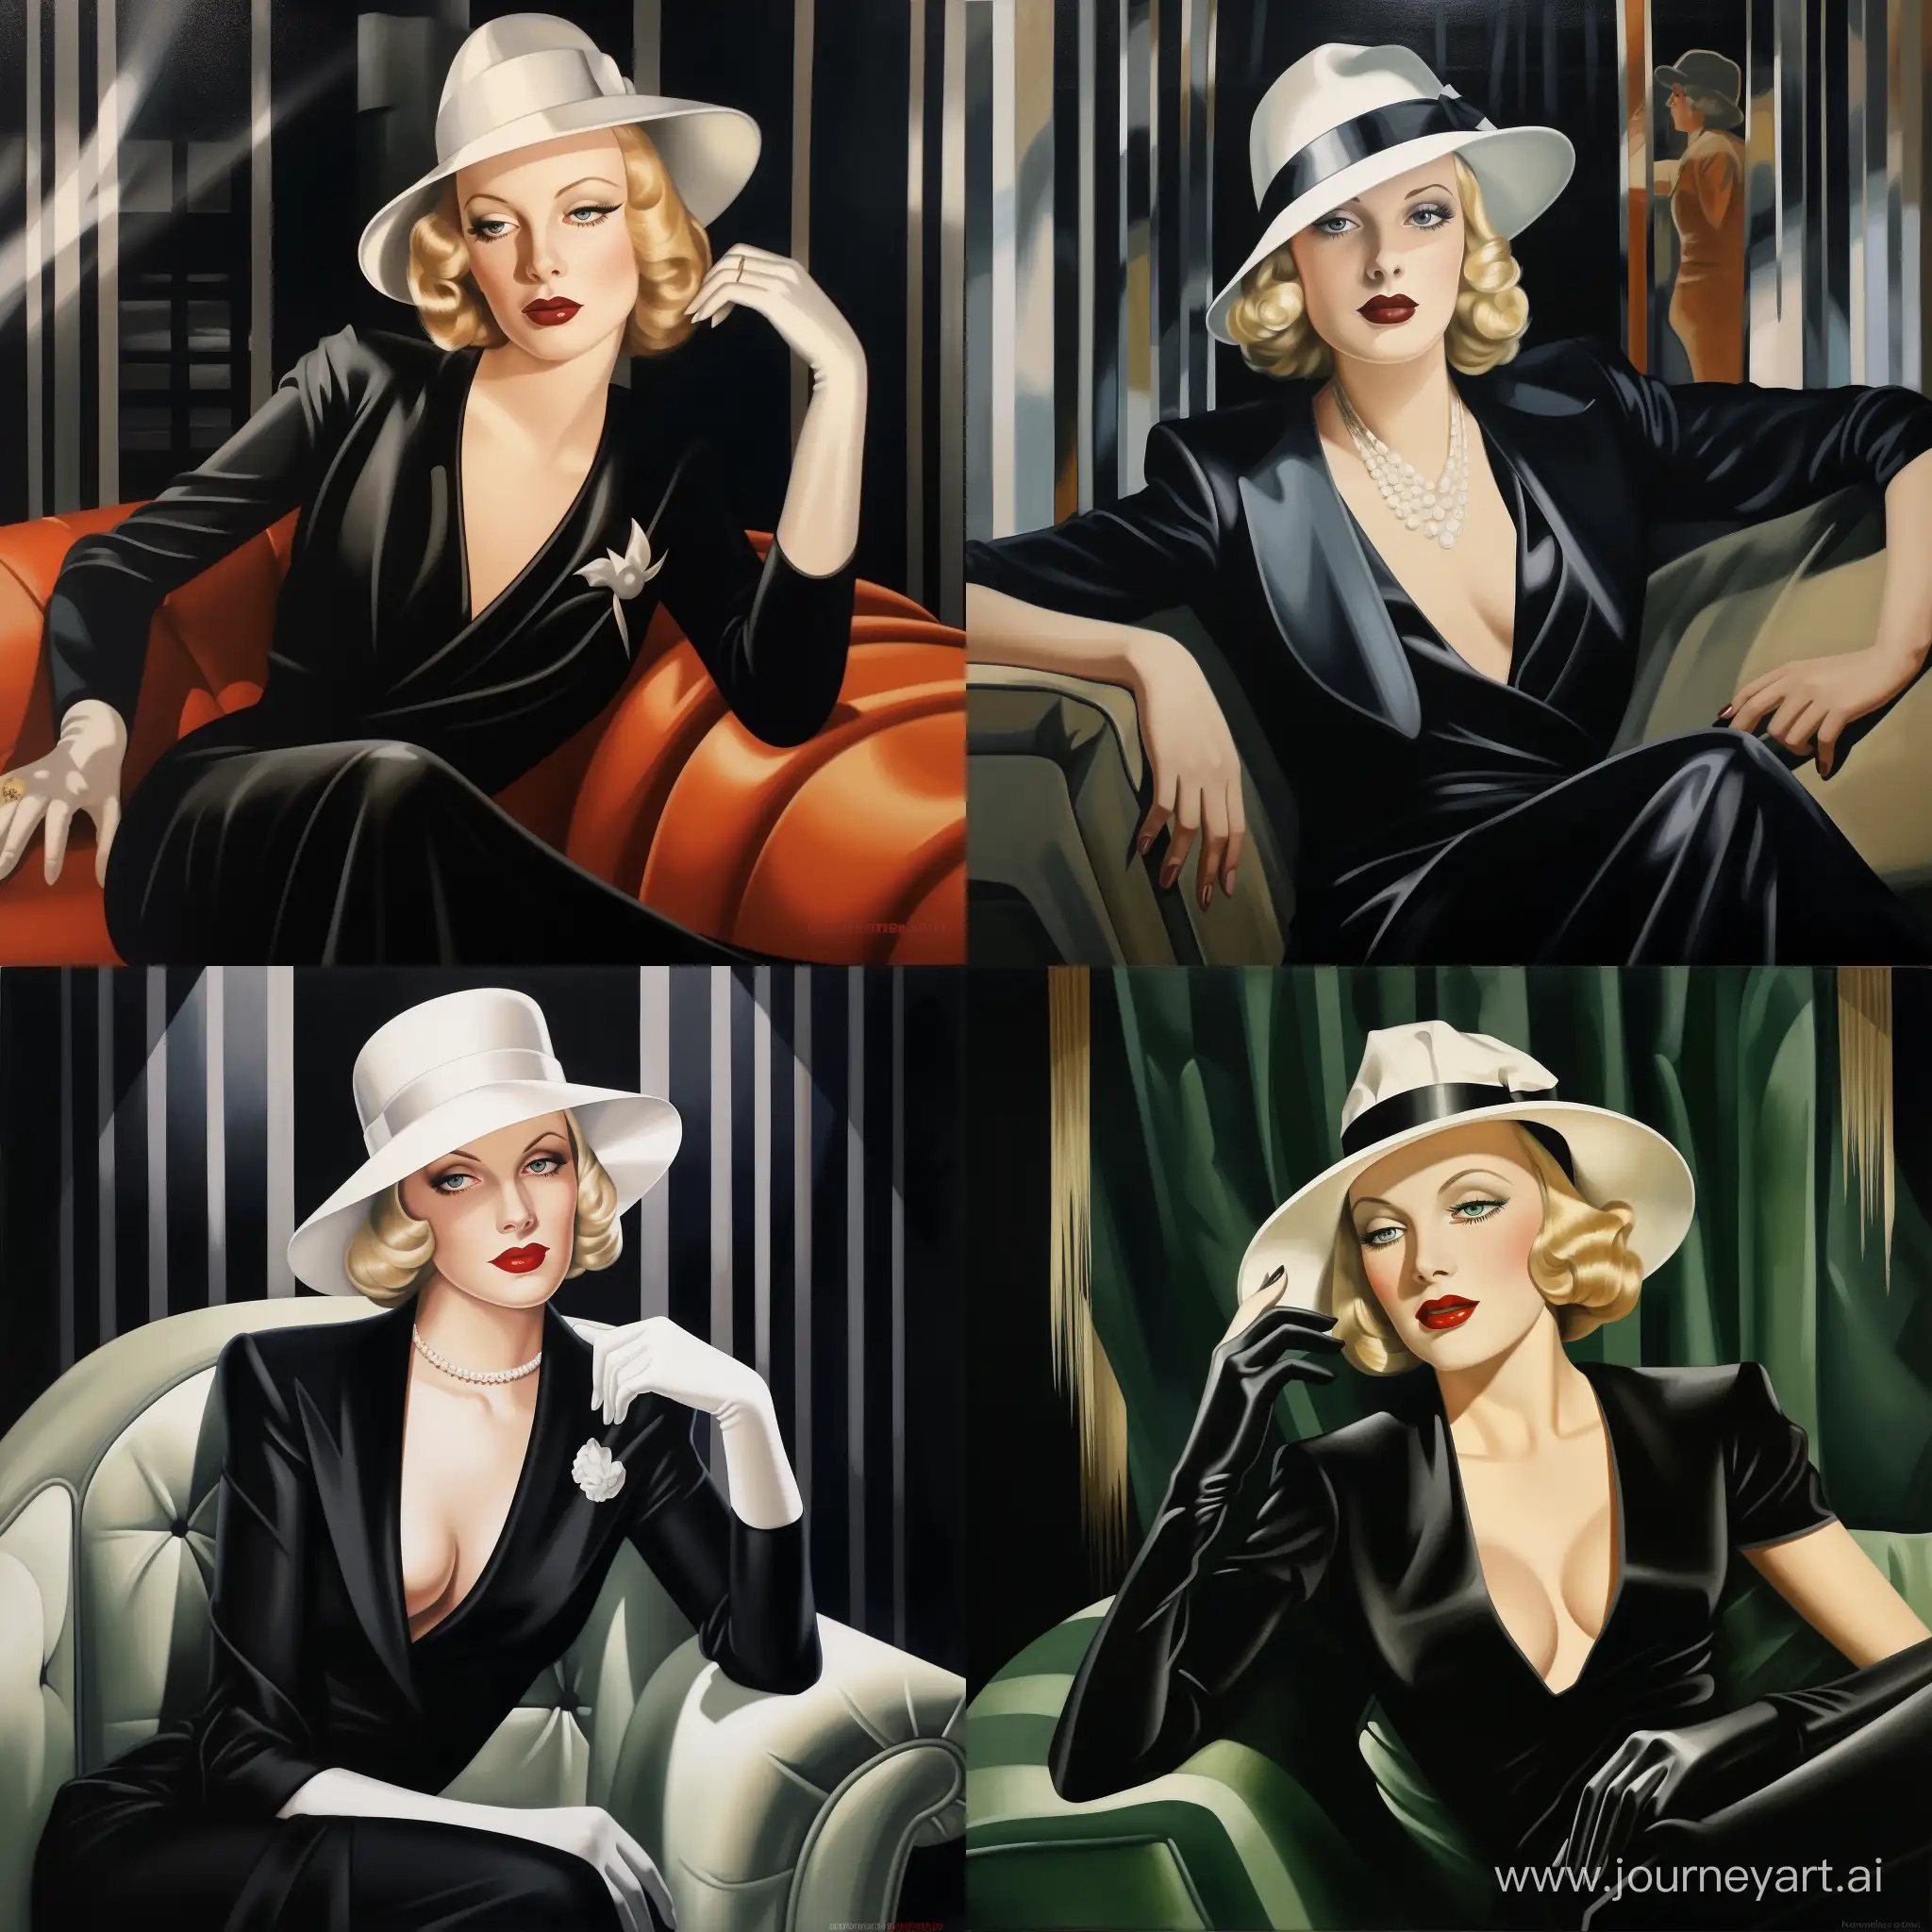 painting in the style of Tamara De Lempicka of a beautiful blonde woman in the 1930's wearing a smart Channel suit and a black hat with one pinned feather on its crowna and a black veil hanging from its brim, the woman is holding a cigarette holder in her black gloved hand, the background is a room that is designed and furnished with a touch of the surreal and colored in gray with gold-leaf gilding, the painting should fill the entire image, Tamara De Lempicka